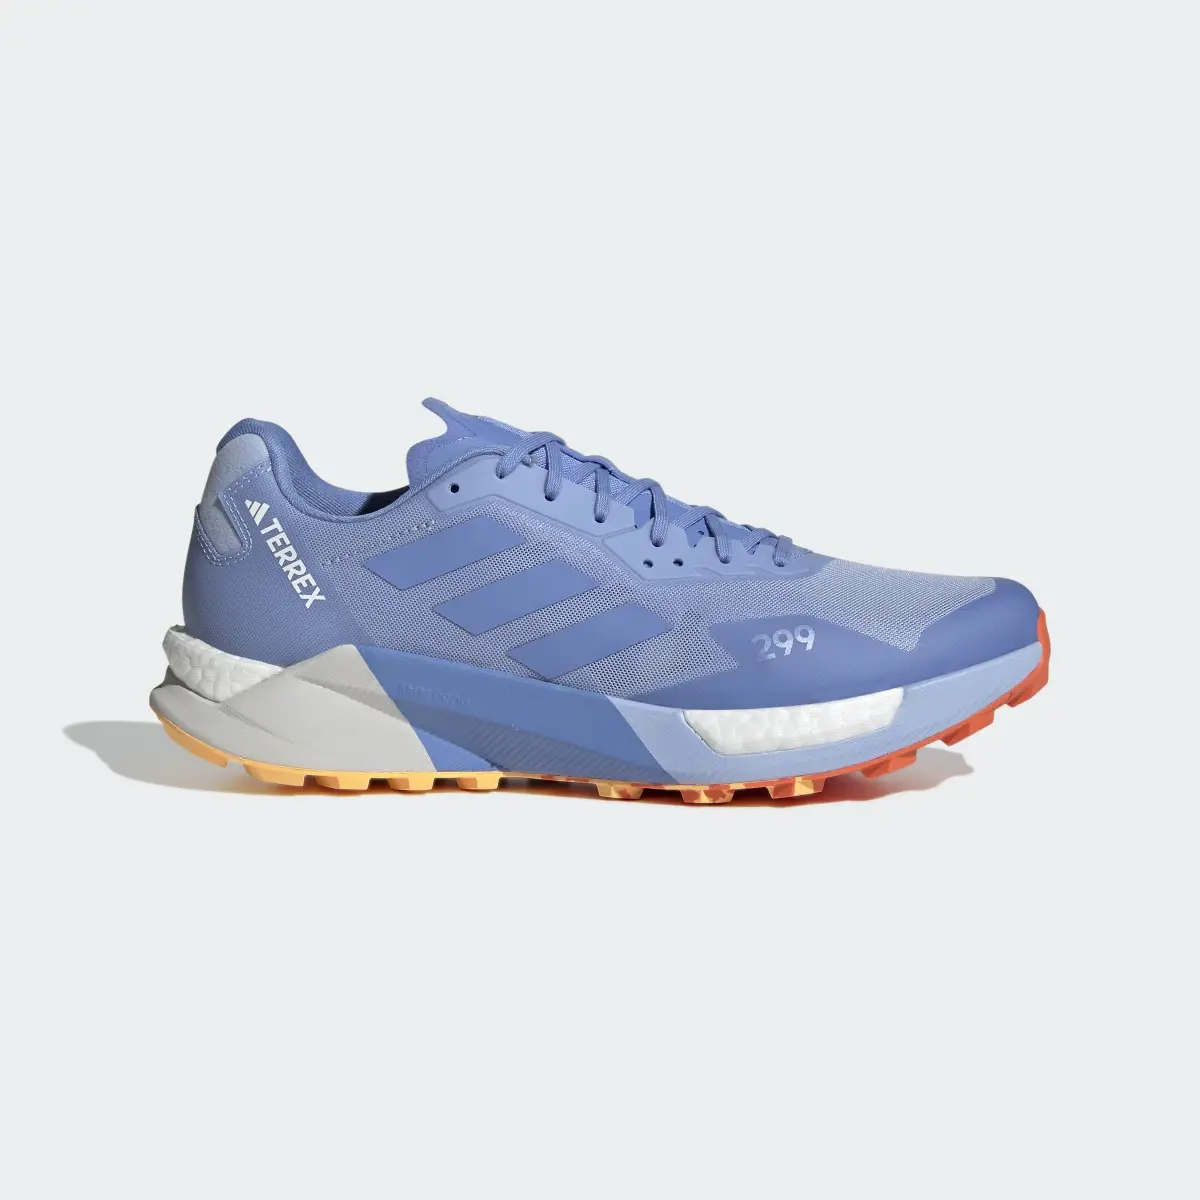 Adidas Terrex Agravic Ultra Trail Running Shoes. 2